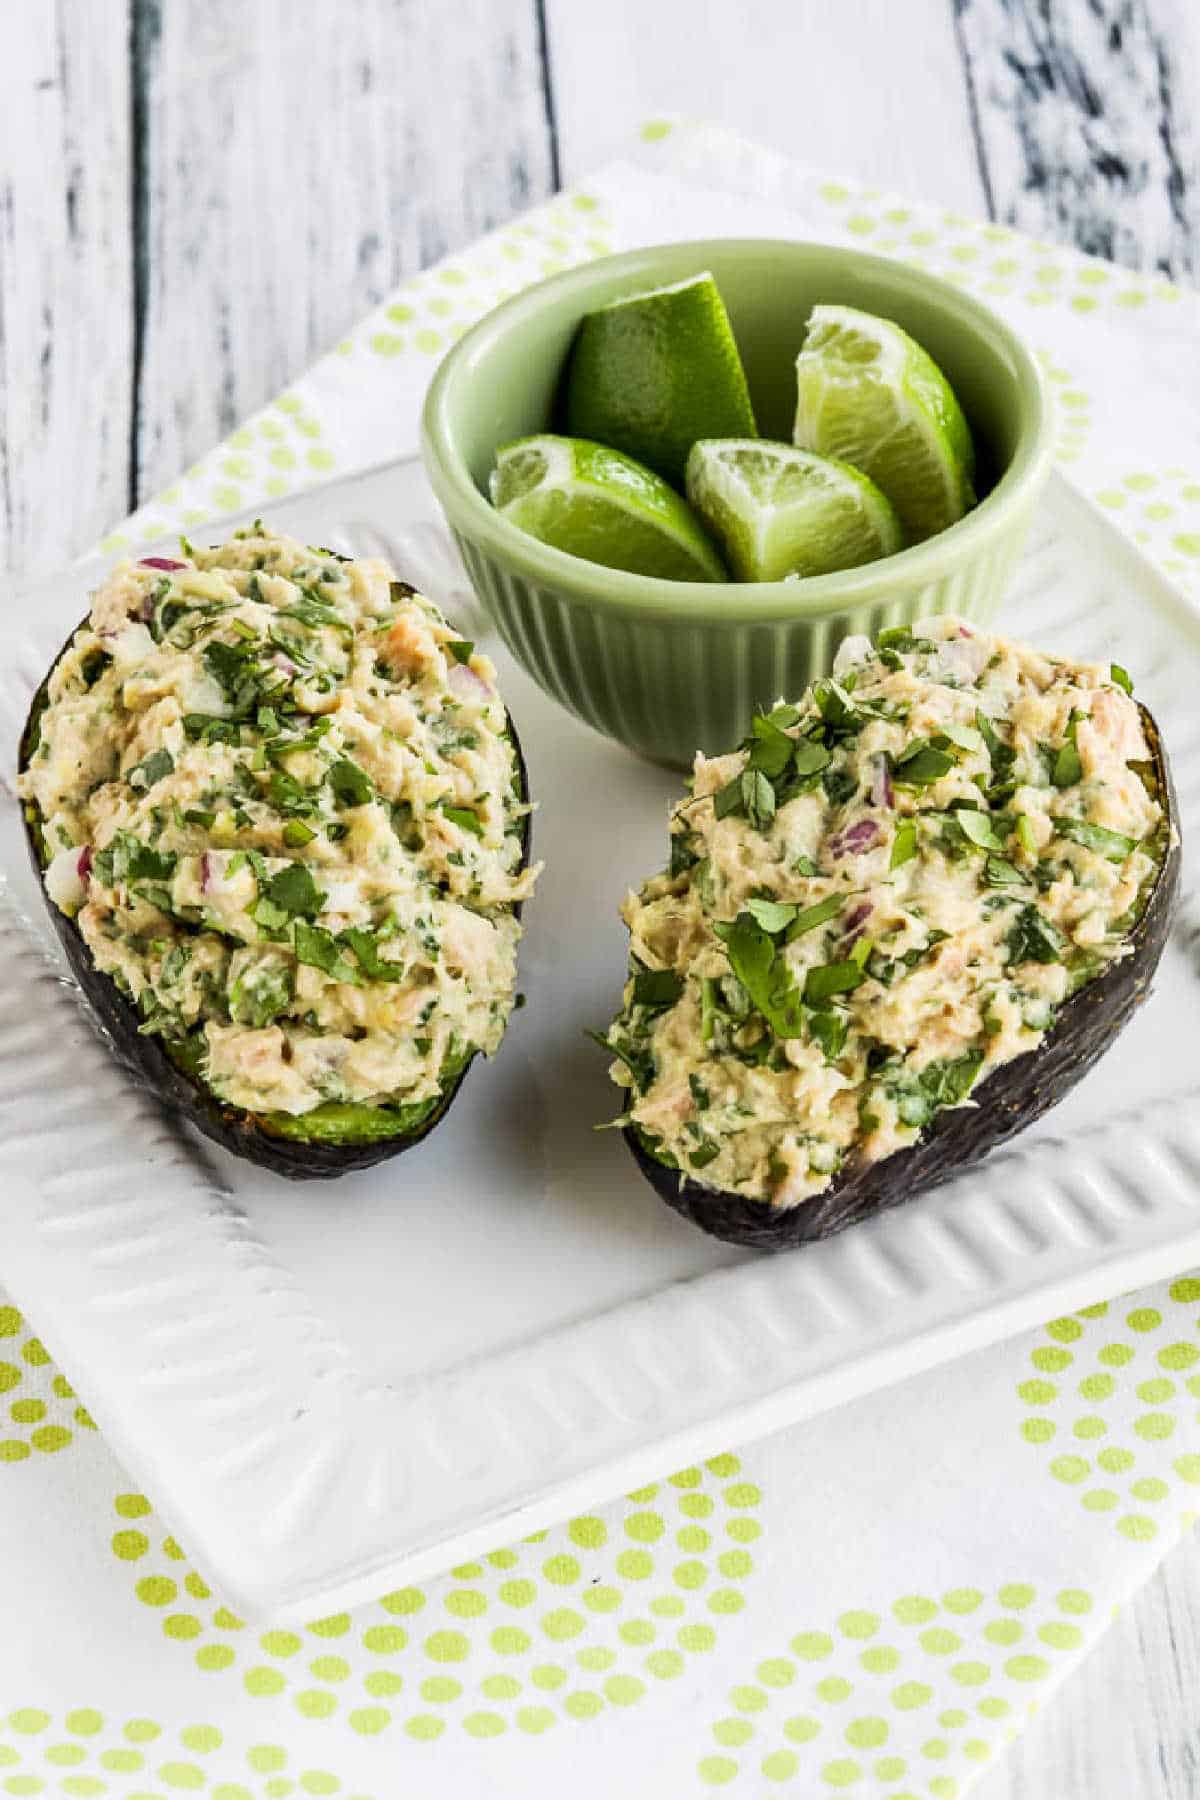 Tuna Stuffed Avocado on serving plate with cut limes